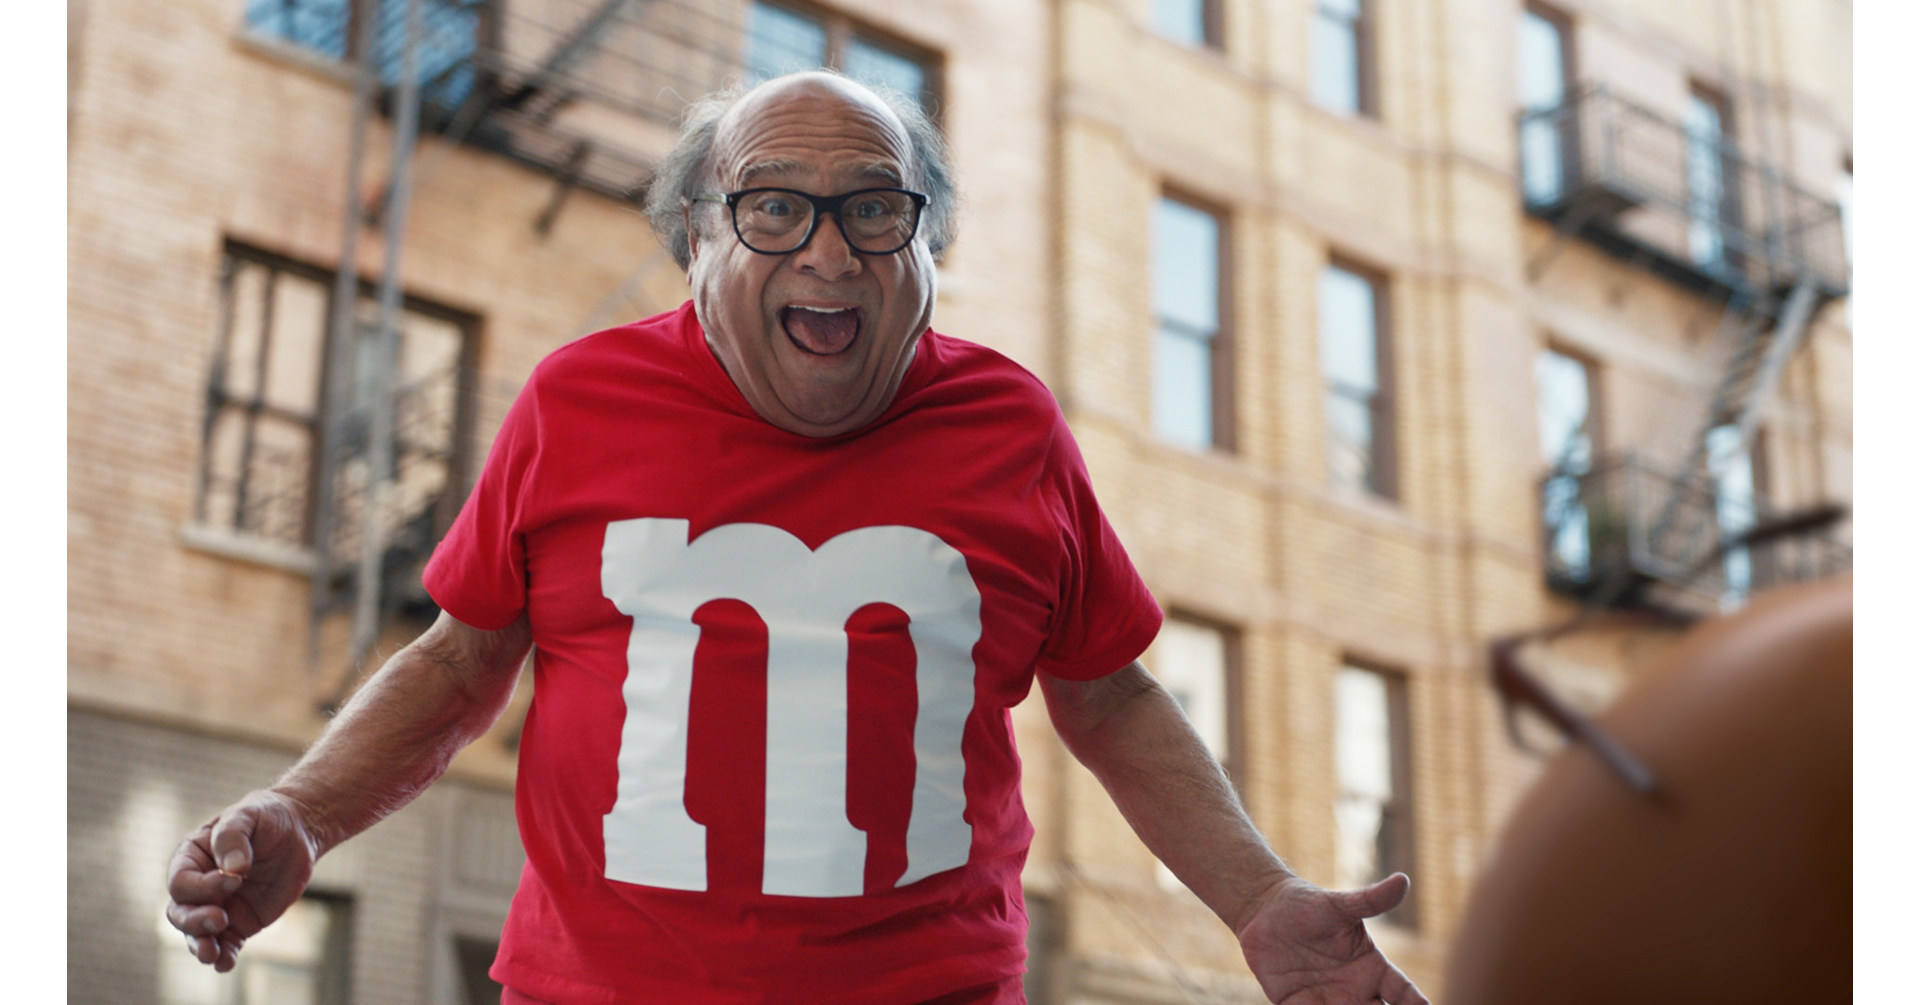 Man Claims To Have Found 'Biggest' M&M Candy